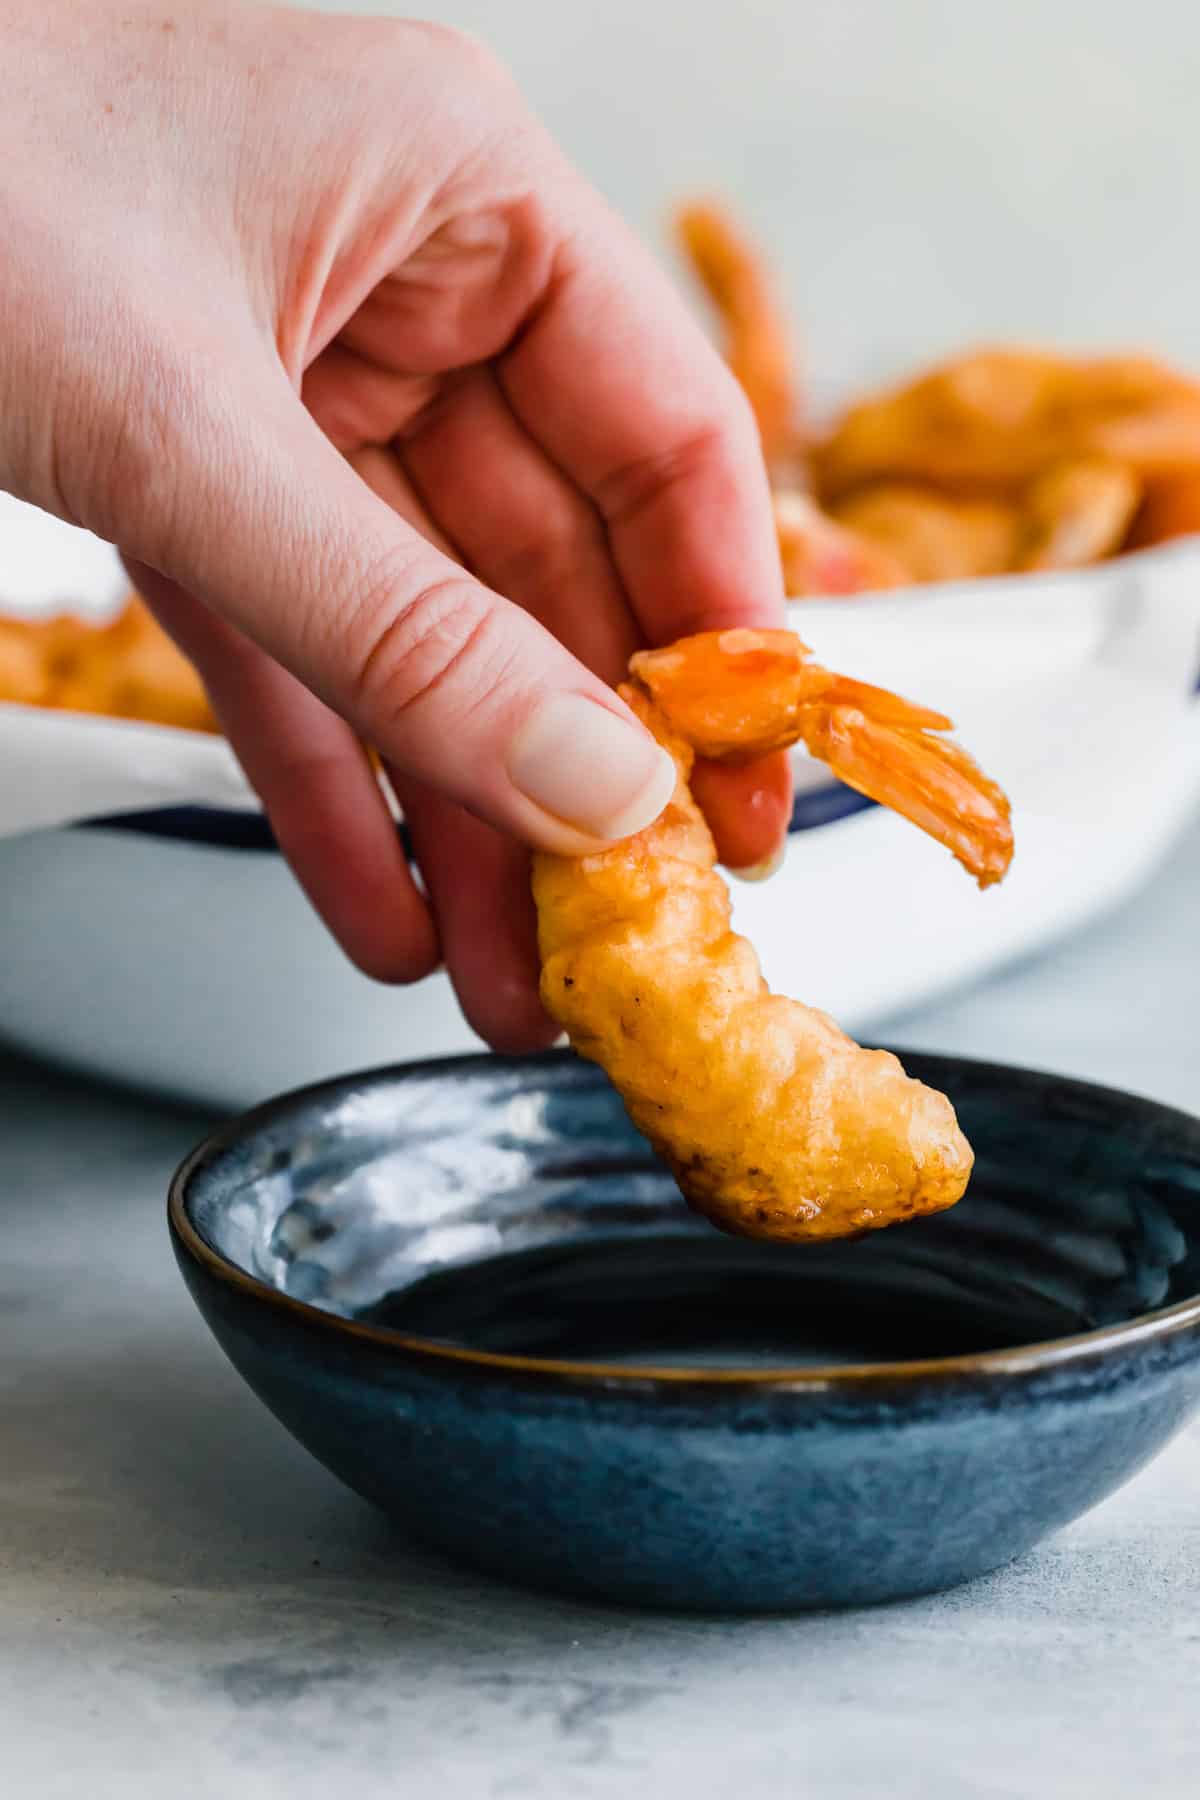 A Hand Dunking a Pan-Fried Shrimp Into a Bowl of Dipping Sauce